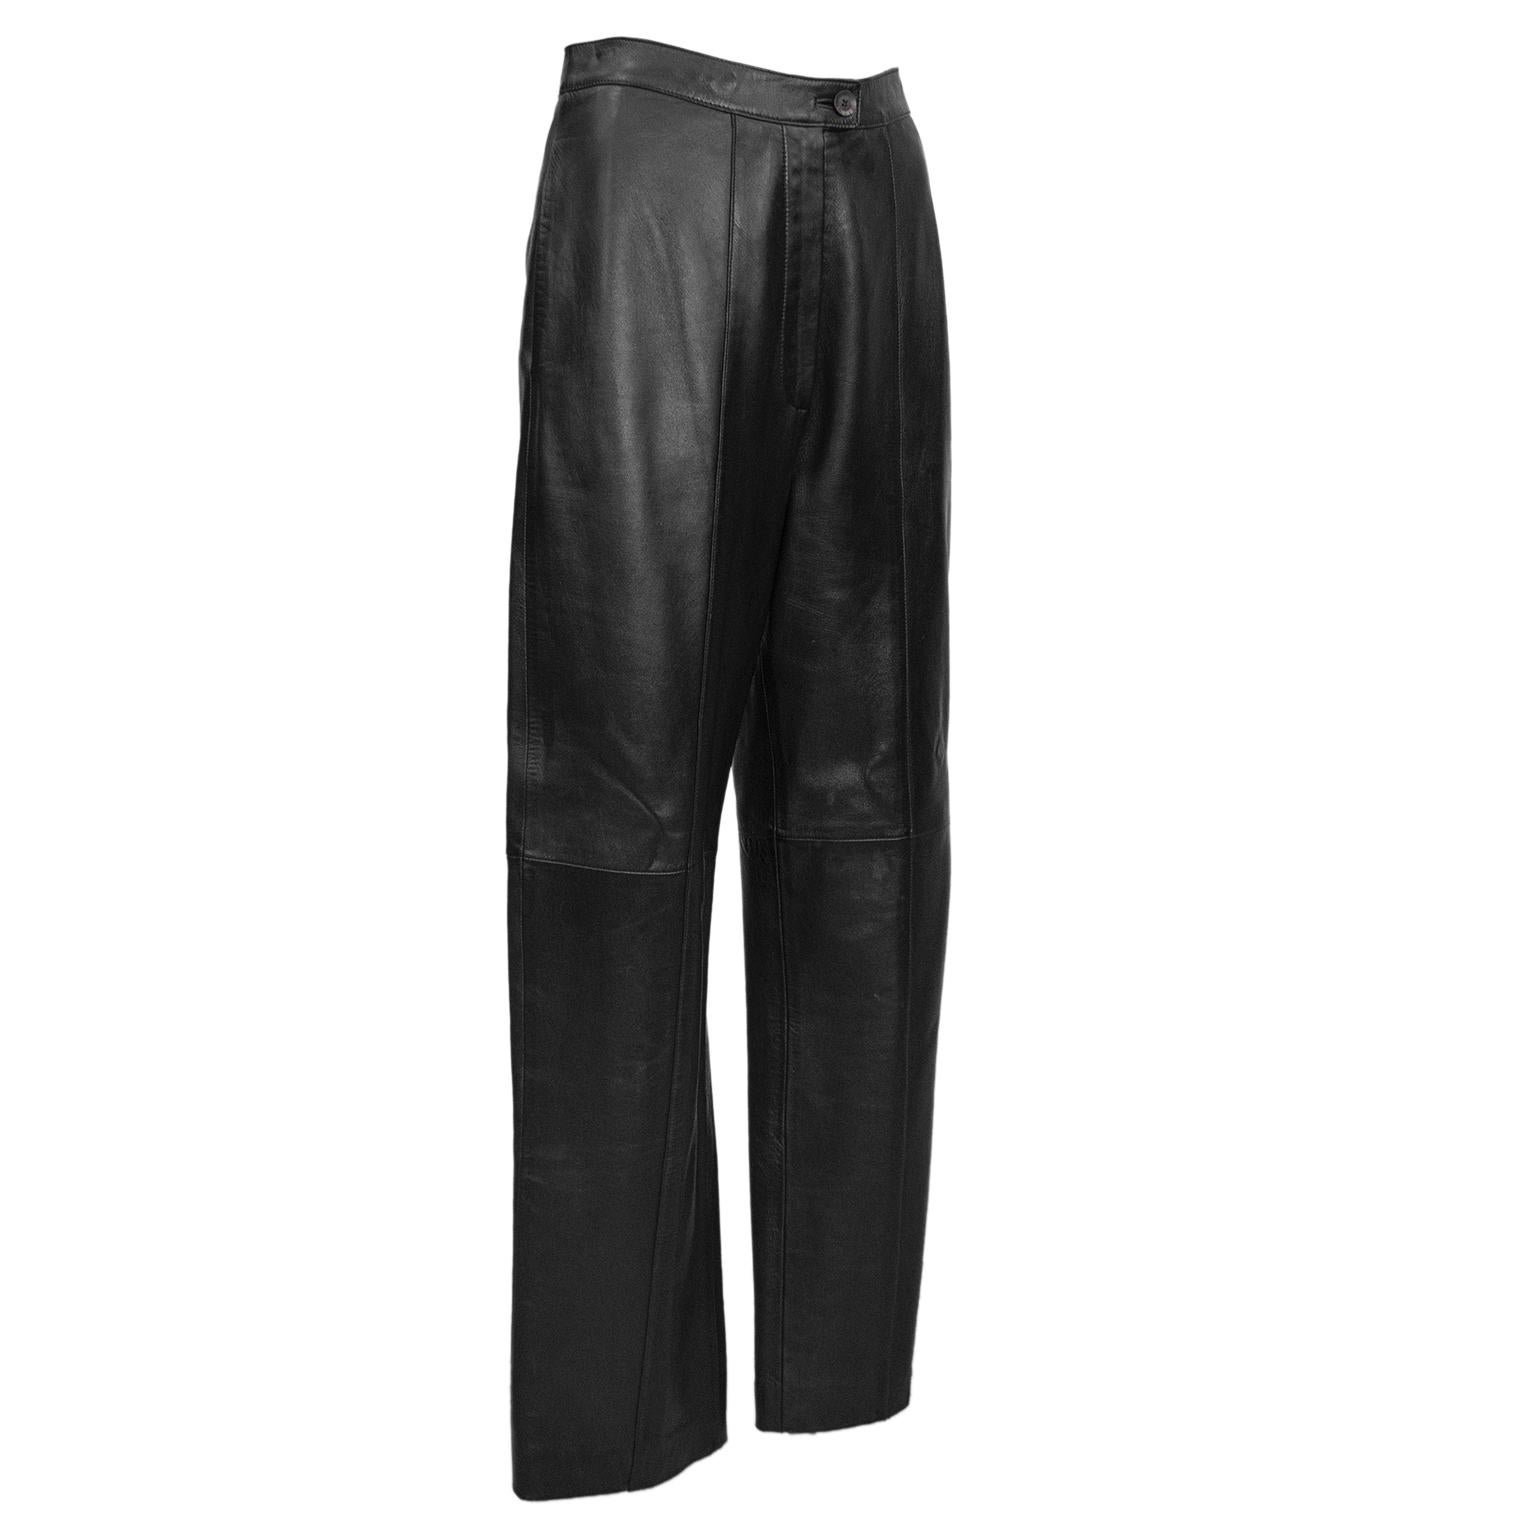 Fabulous pair of butter soft black leather Loewe pants from the 1970s. Highwaisted with a single black button closure with zipper fly. Side slit pockets. Designed to be straight through the leg and slightly cropped and hit just above the ankle.